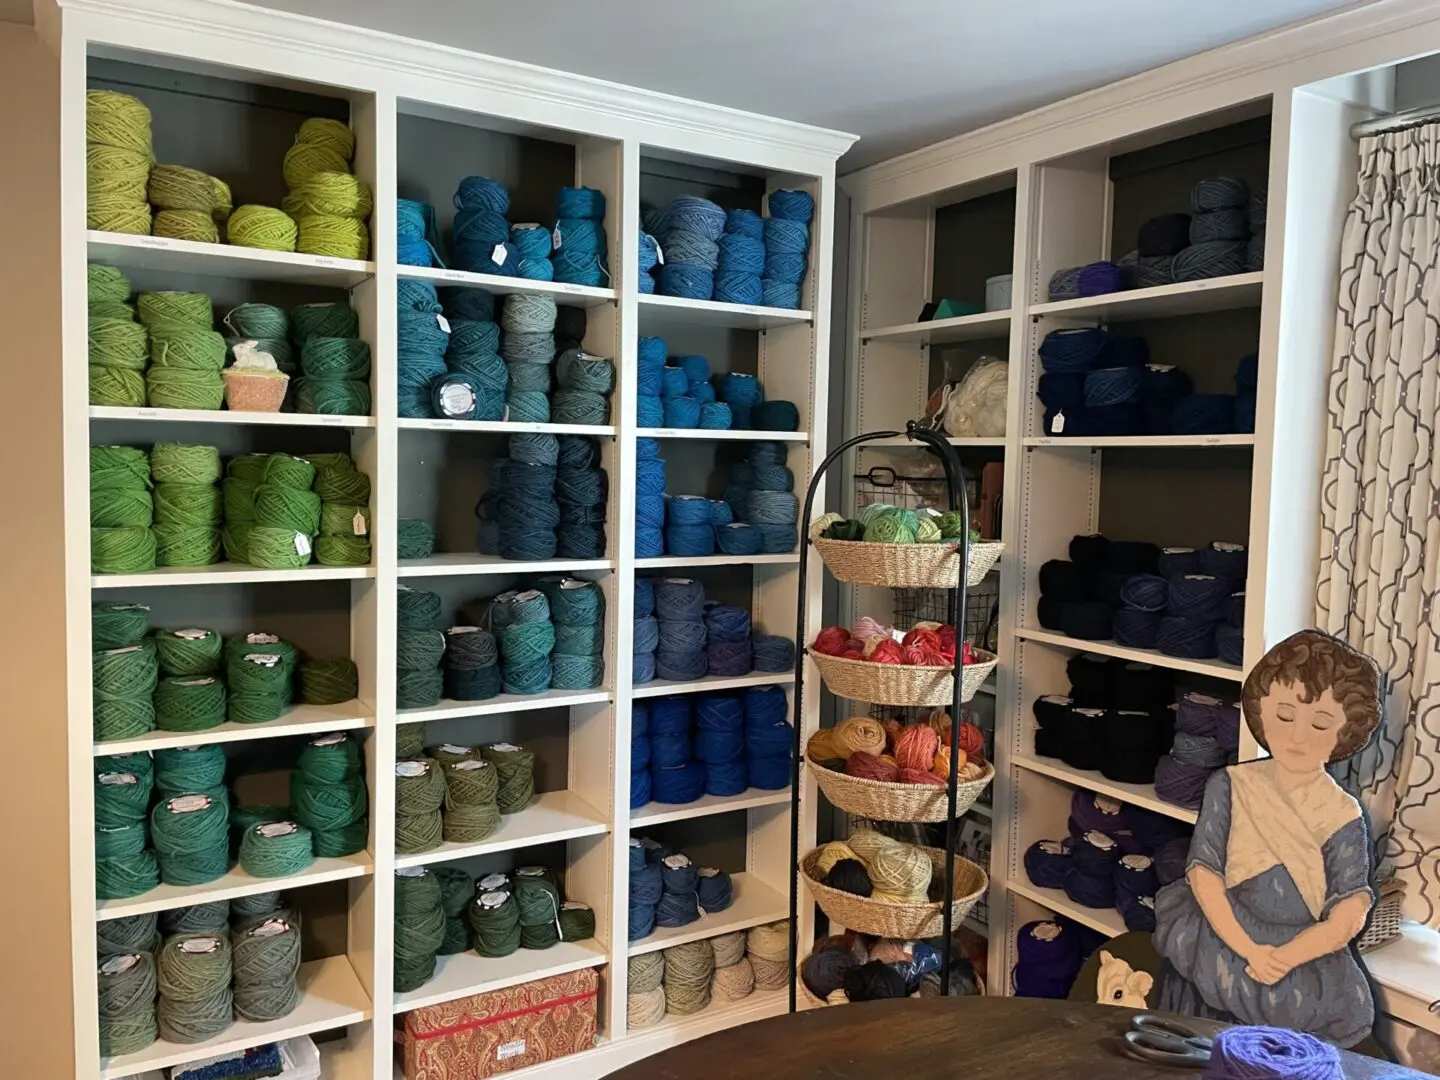 A collection of yarn